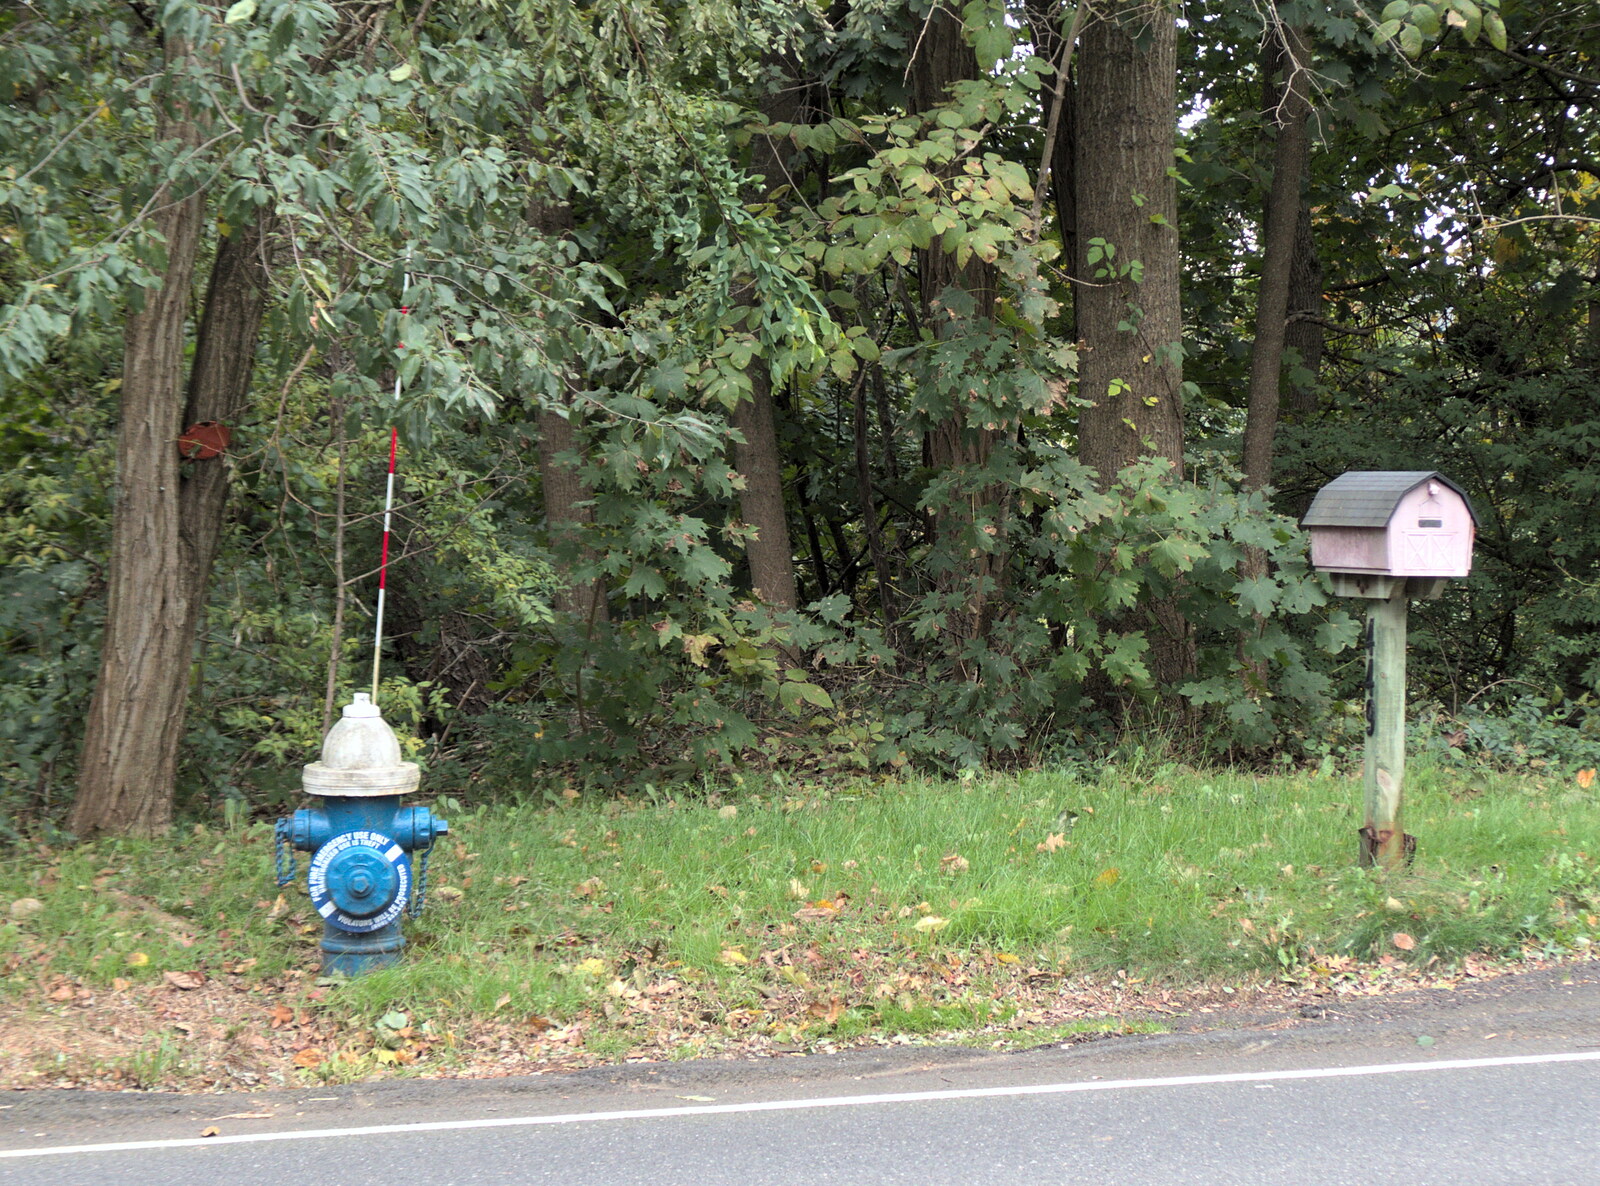 A fire hydrant and letterbox on a post from A Trip to Short Hills, New Jersey, United States - 20th October 2018